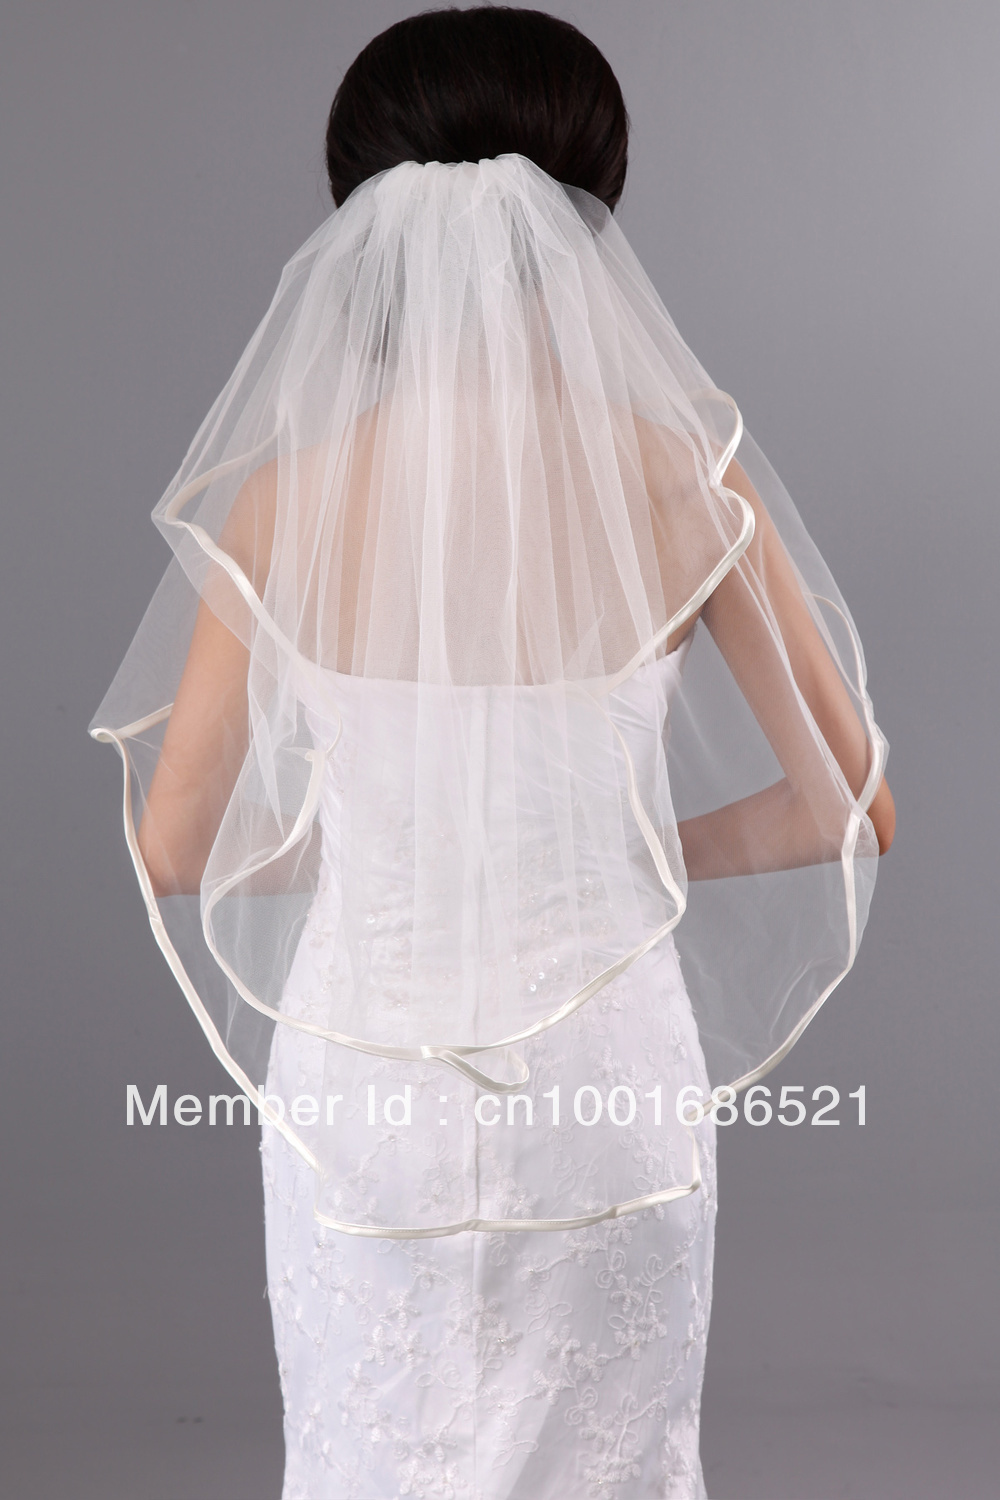 free ship 2013 new styel brige veil,double ribbon edge with 1.5 meters long,fashion top qualit wedding dress accessories